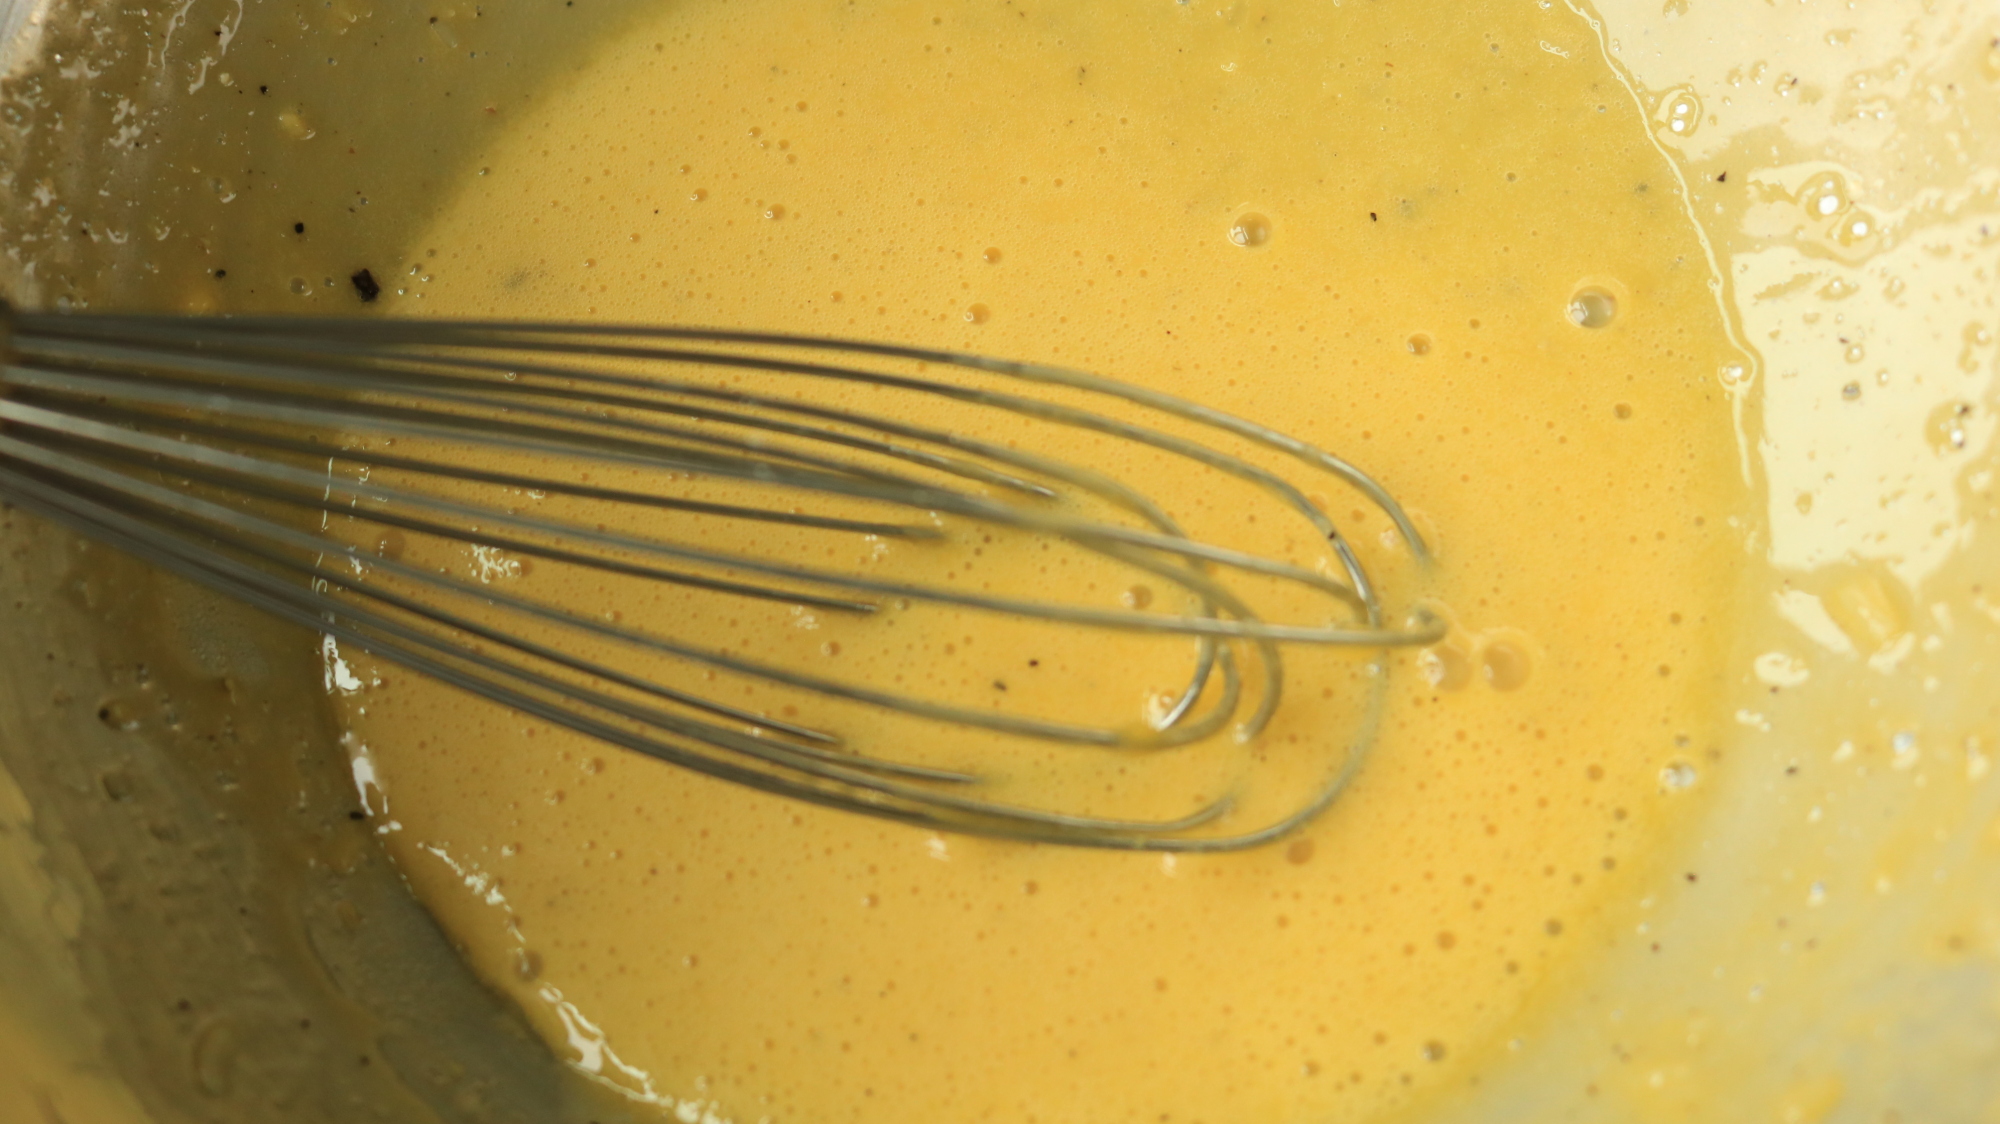 A whisk in a bowl of yellow sauce.